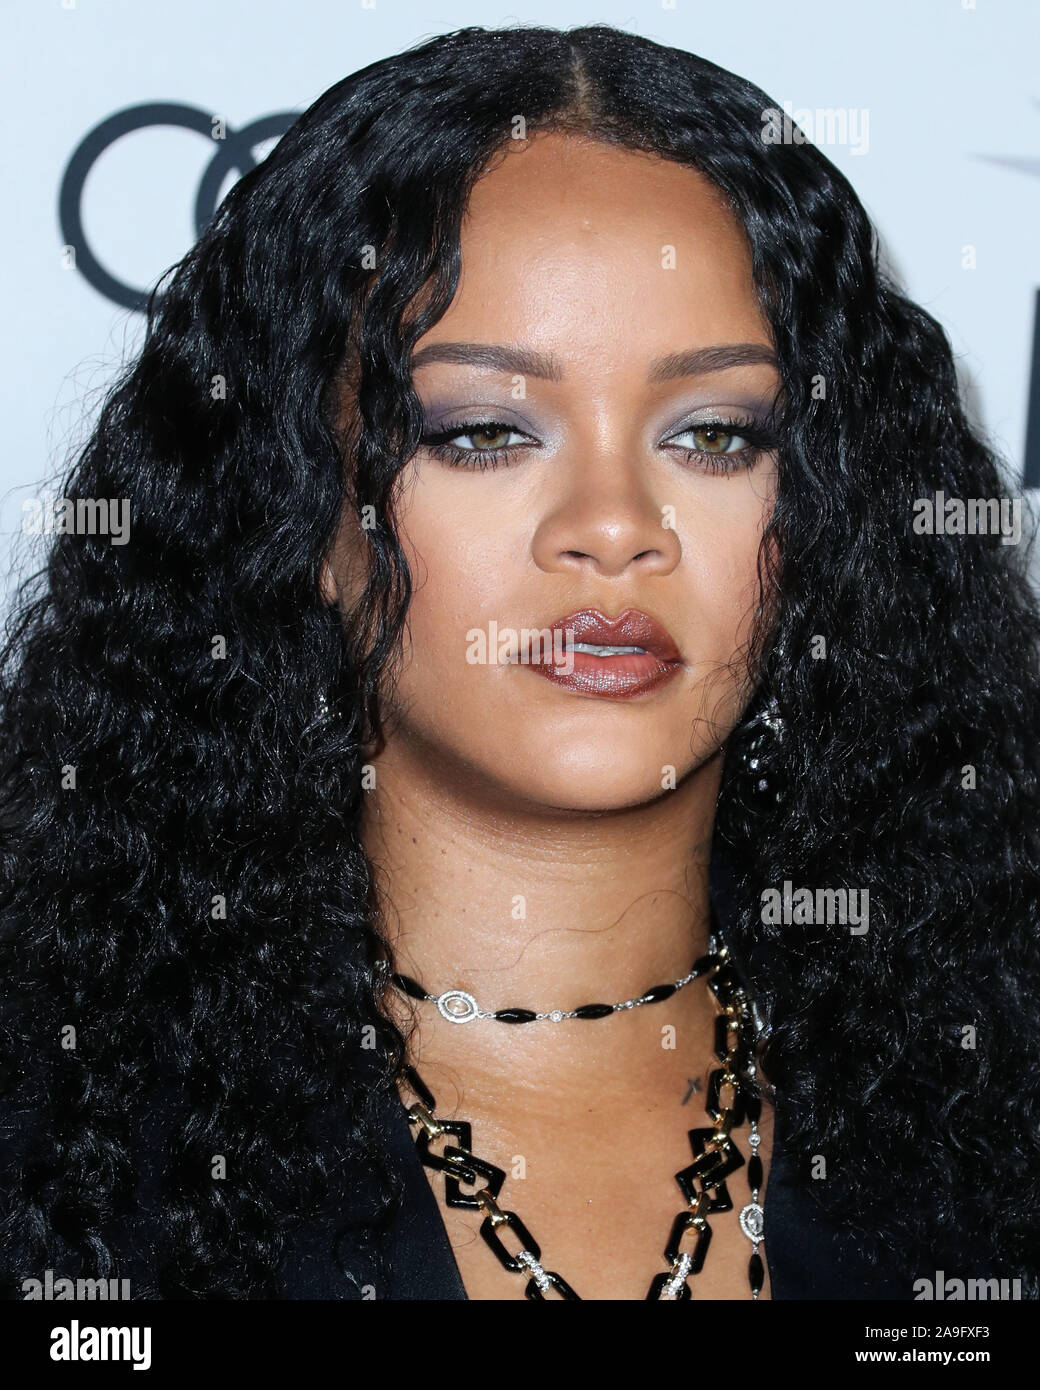 Hollywood, United States. 14th Nov, 2019. HOLLYWOOD, LOS ANGELES, CALIFORNIA, USA - NOVEMBER 14: Singer Rihanna wearing a John Galliano evening coat from William Vintage along with a necklace and bracelets by David Webb arrives at the AFI FEST 2019 - Opening Night Gala - Premiere Of Universal Pictures' 'Queen And Slim' held at the TCL Chinese Theatre IMAX on November 14, 2019 in Hollywood, Los Angeles, California, United States. (Photo by Xavier Collin/Image Press Agency) Credit: Image Press Agency/Alamy Live News Stock Photo